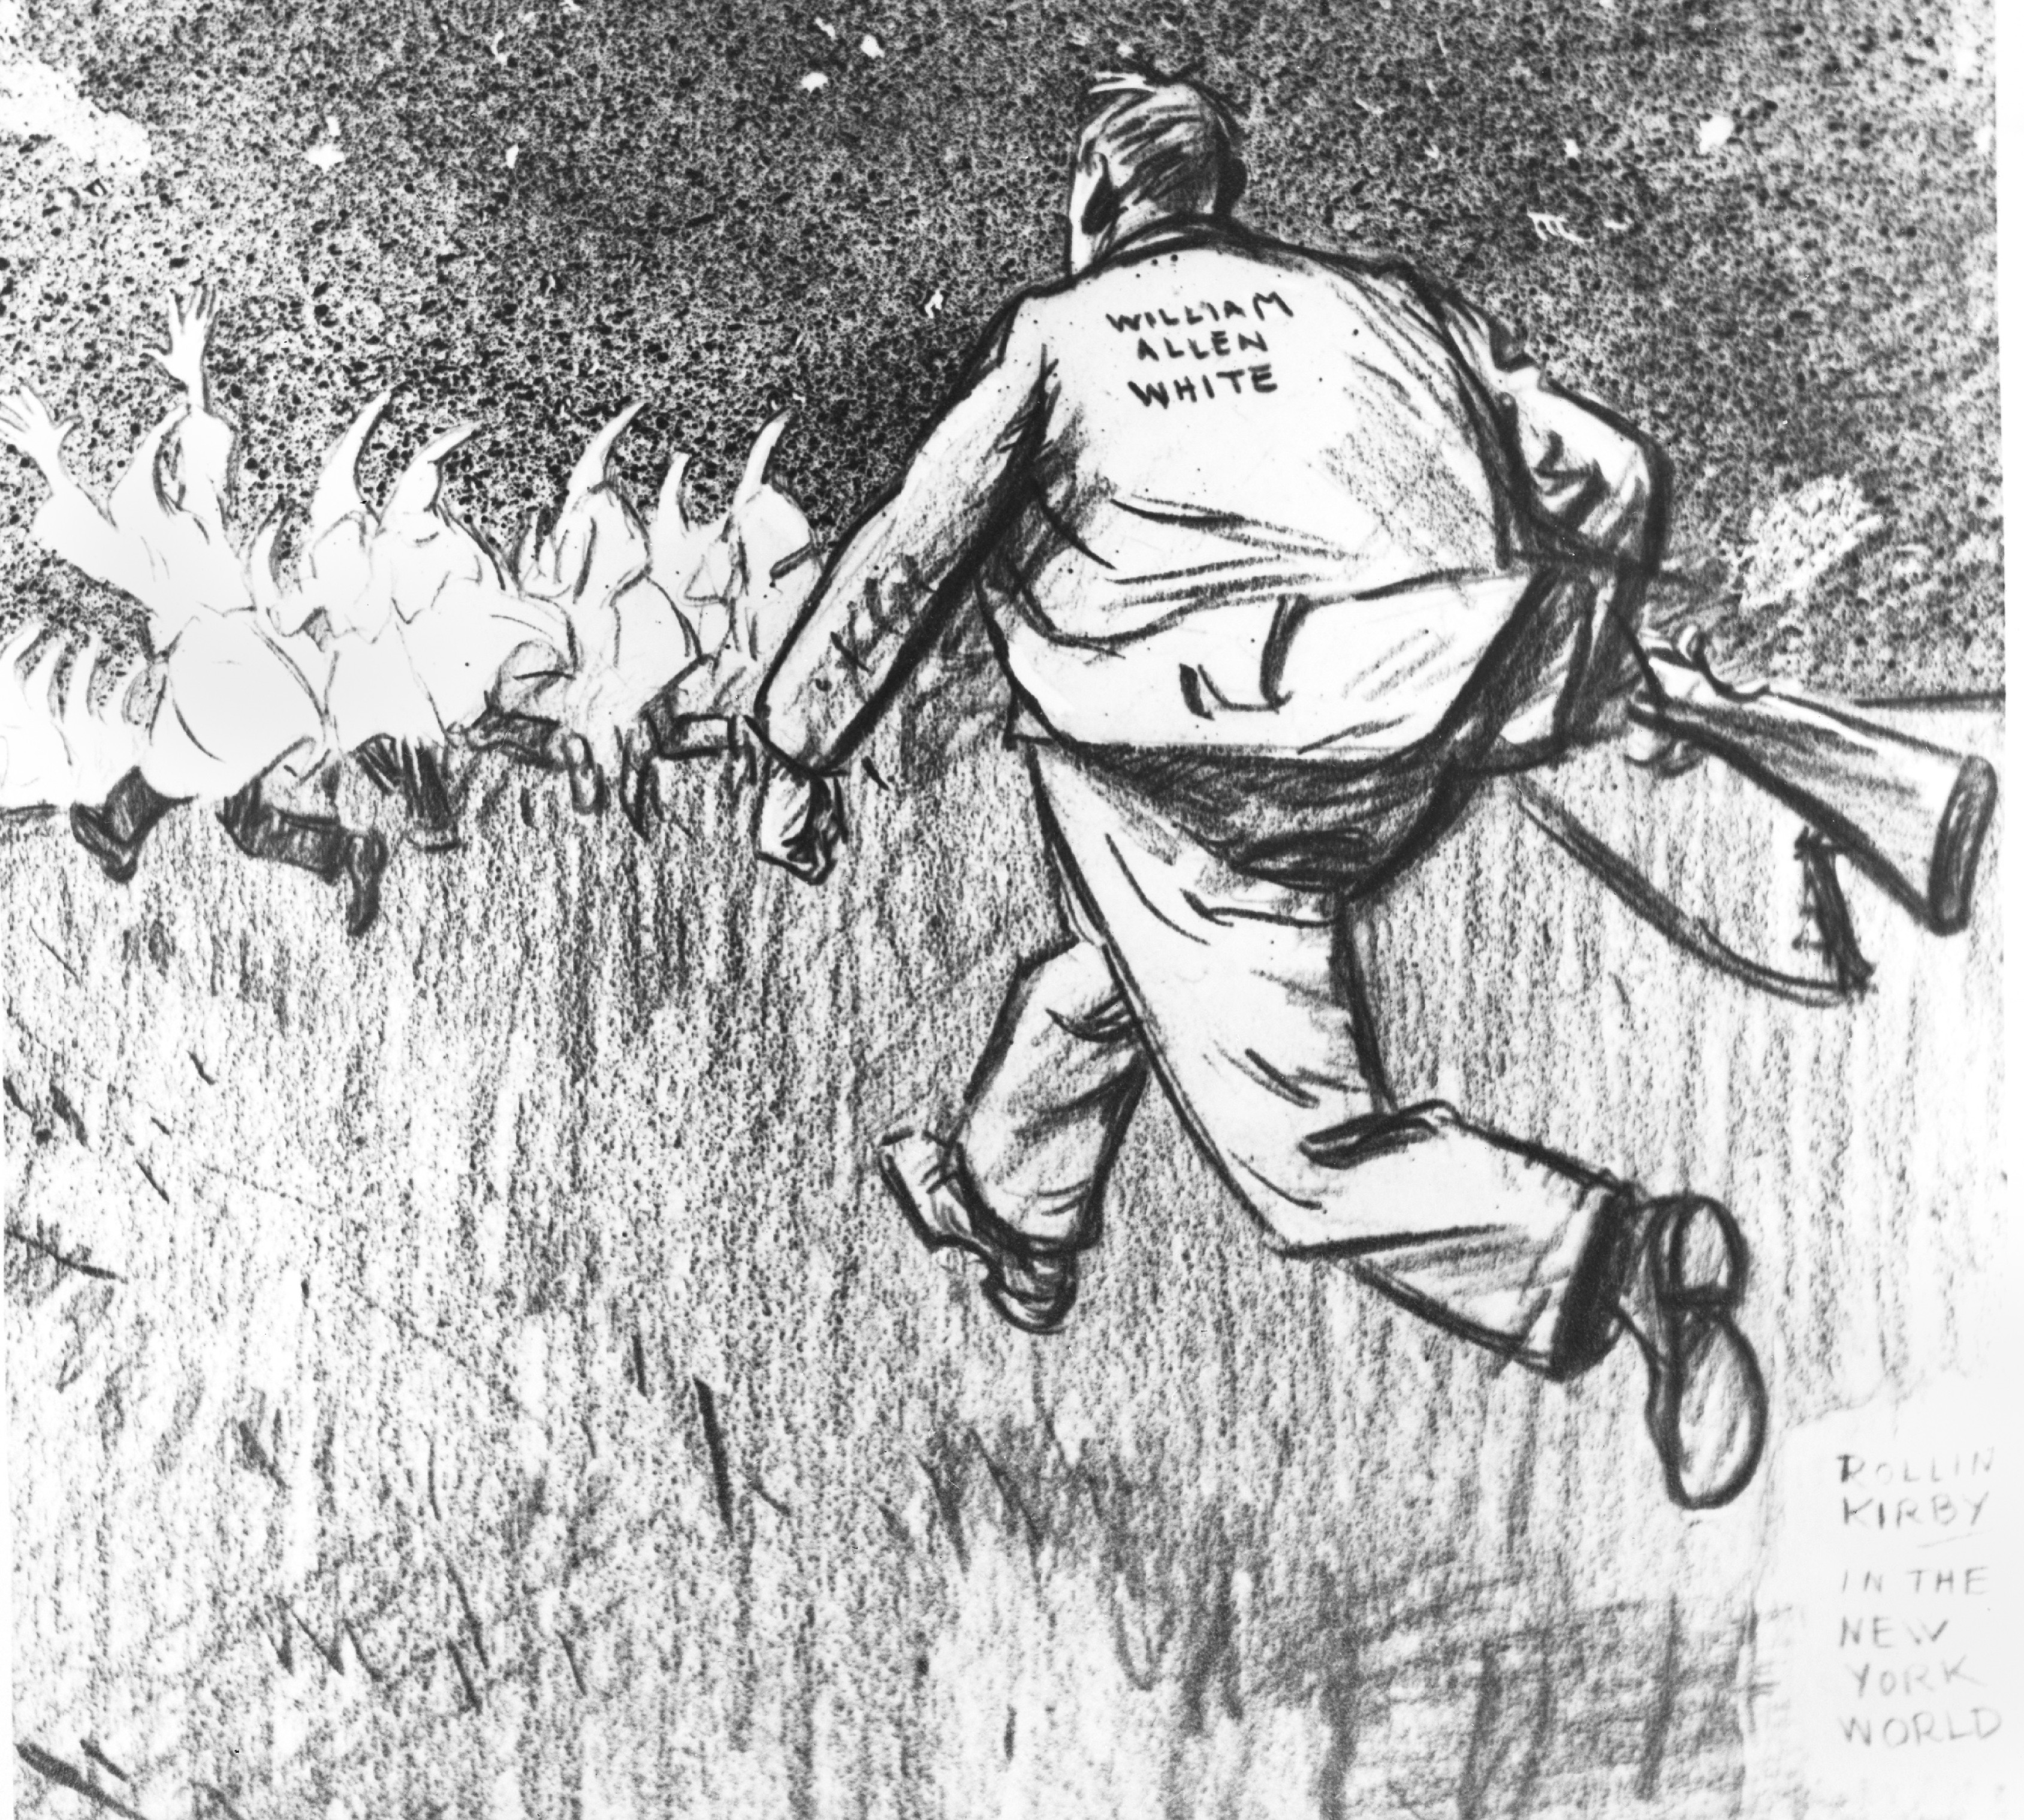 William Allen White and the KKK in Kansas: "A Real American Goes Hunting" Main Splash Image